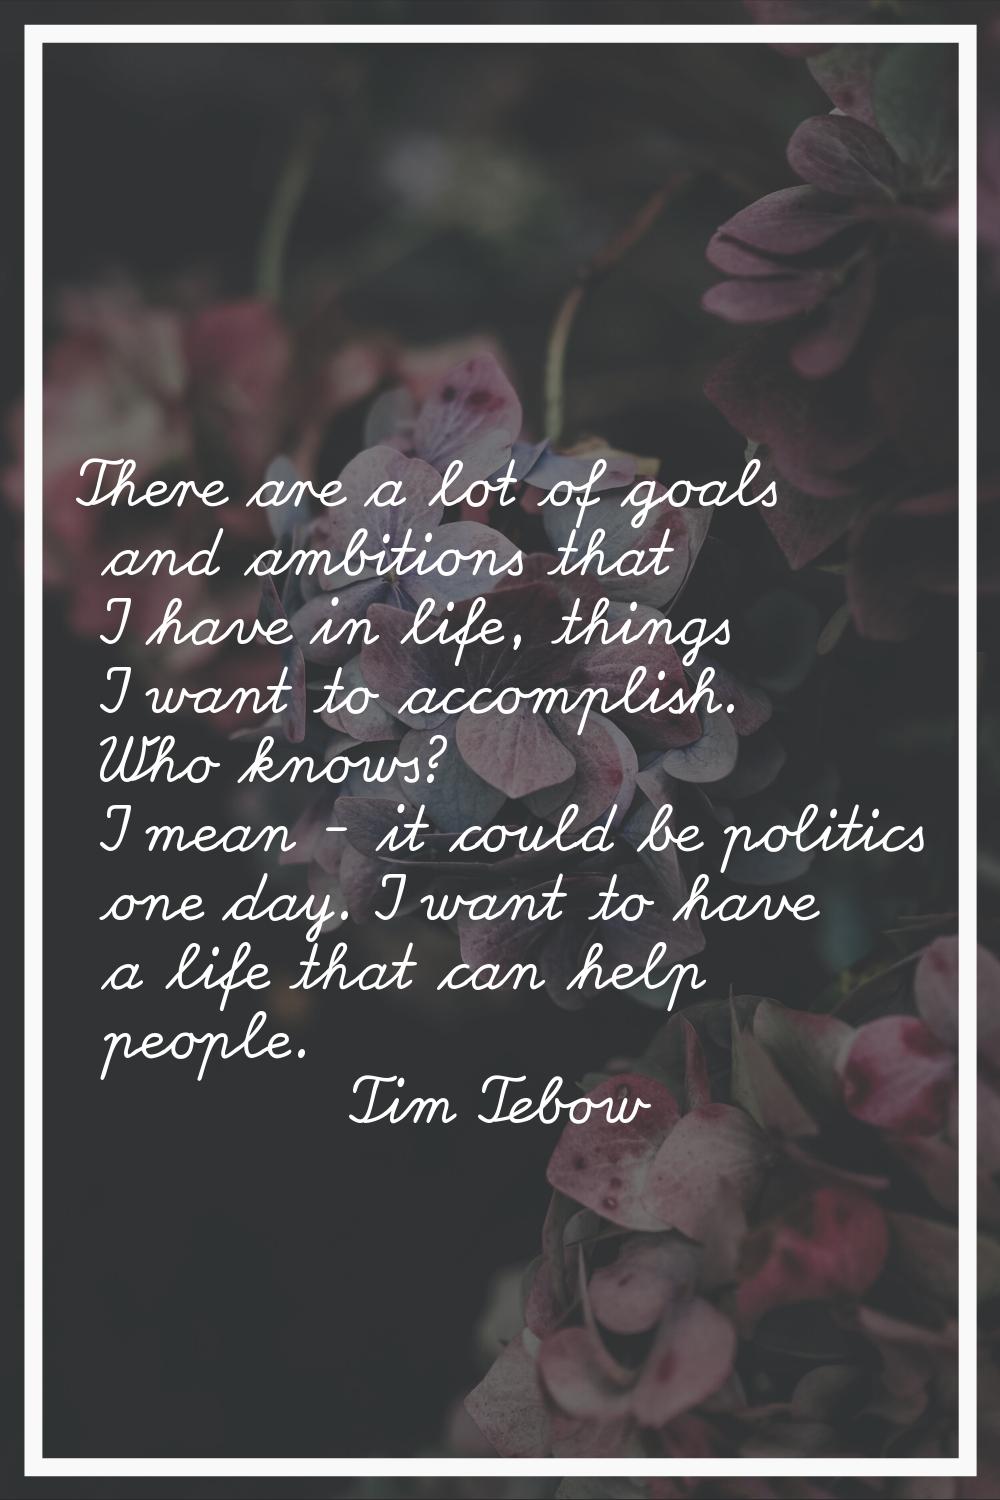 There are a lot of goals and ambitions that I have in life, things I want to accomplish. Who knows?